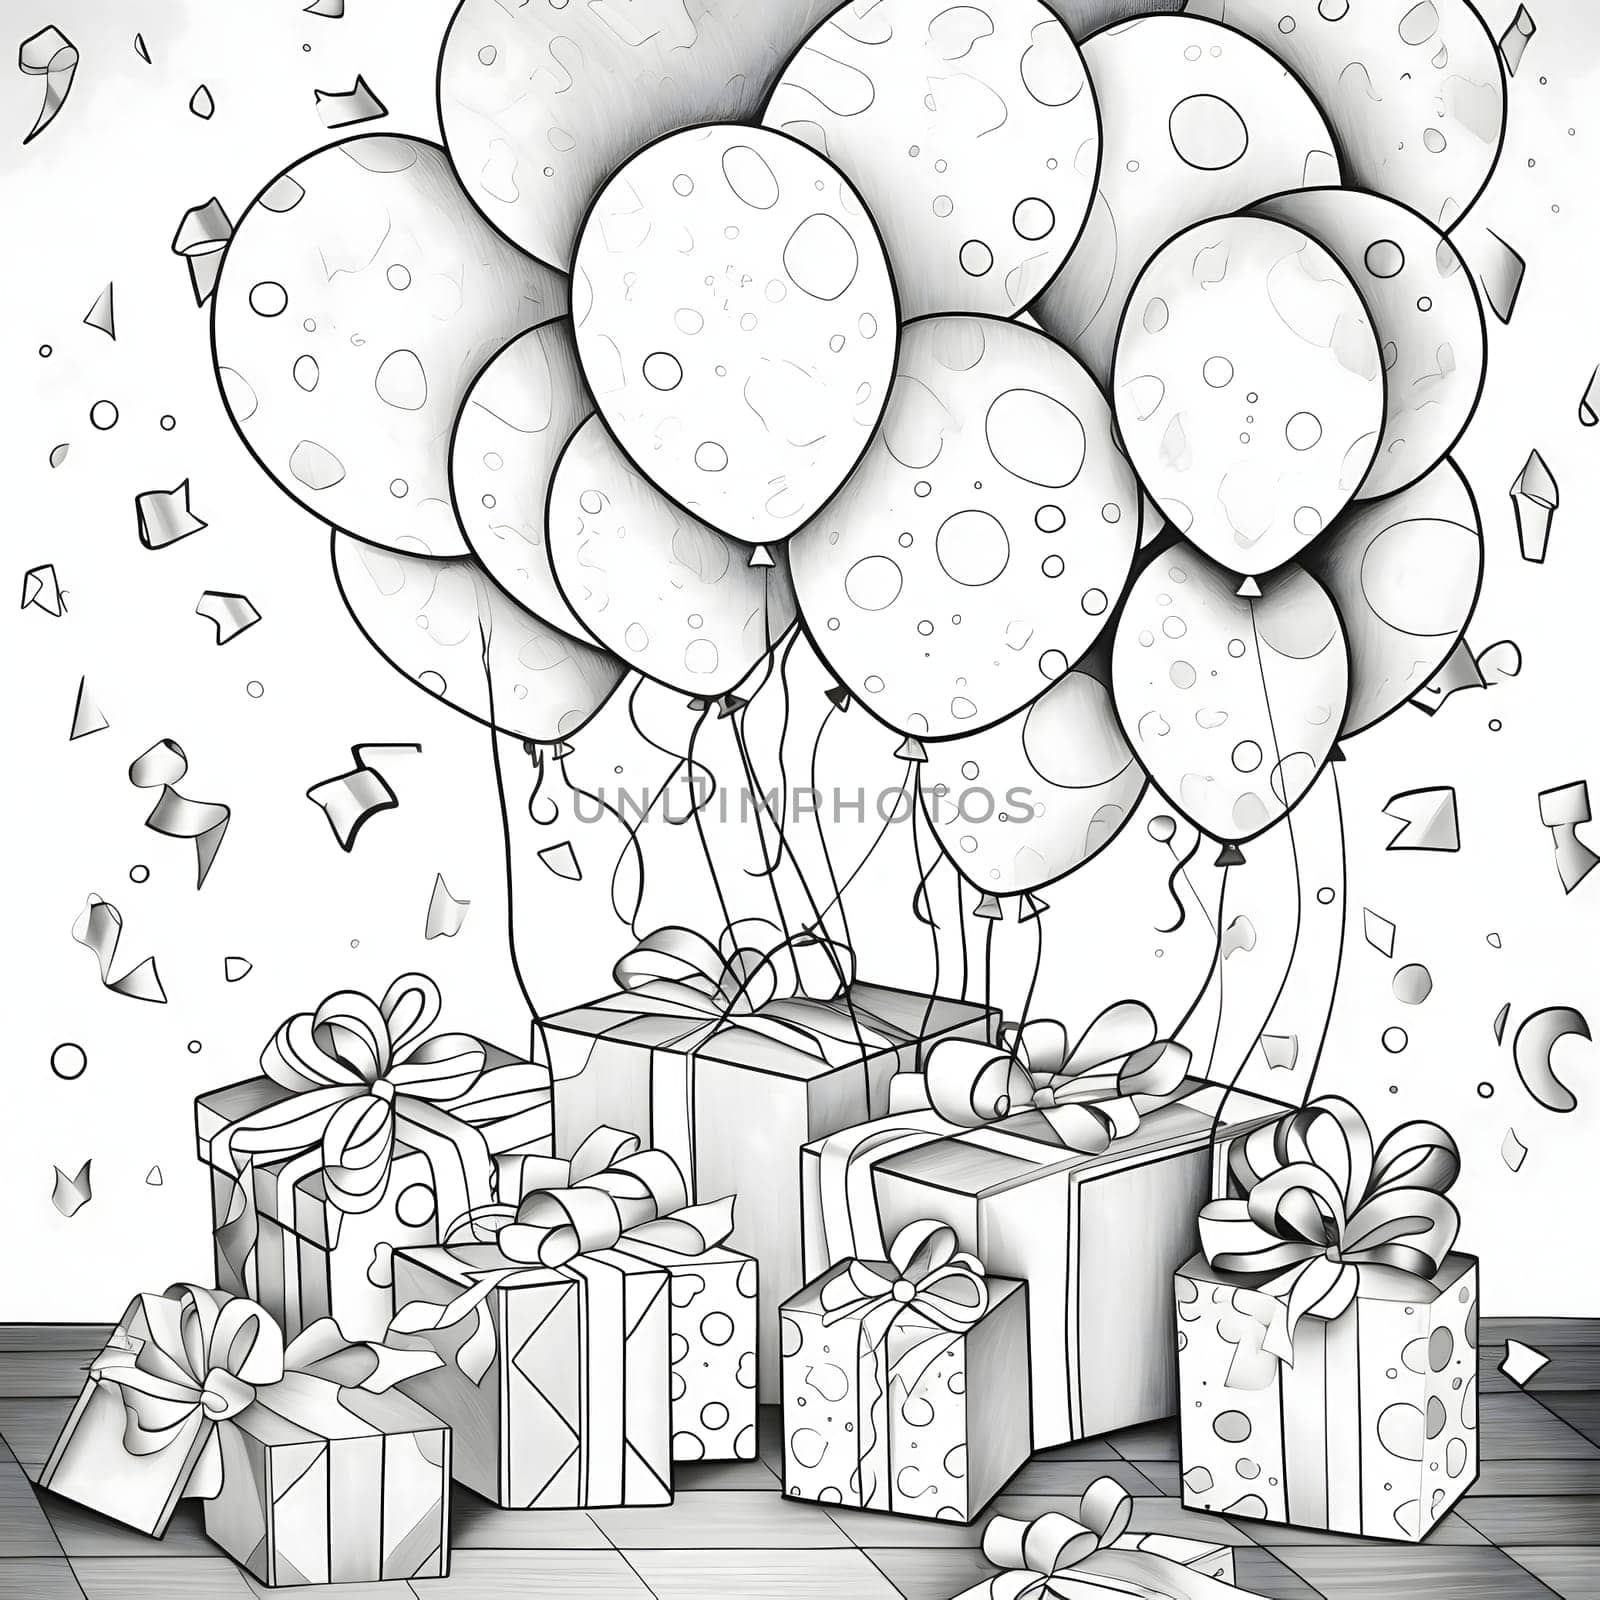 Balloons, gifts and confetti. Black and White coloring page. New Year's fun and festivities. A time of celebration and resolutions.